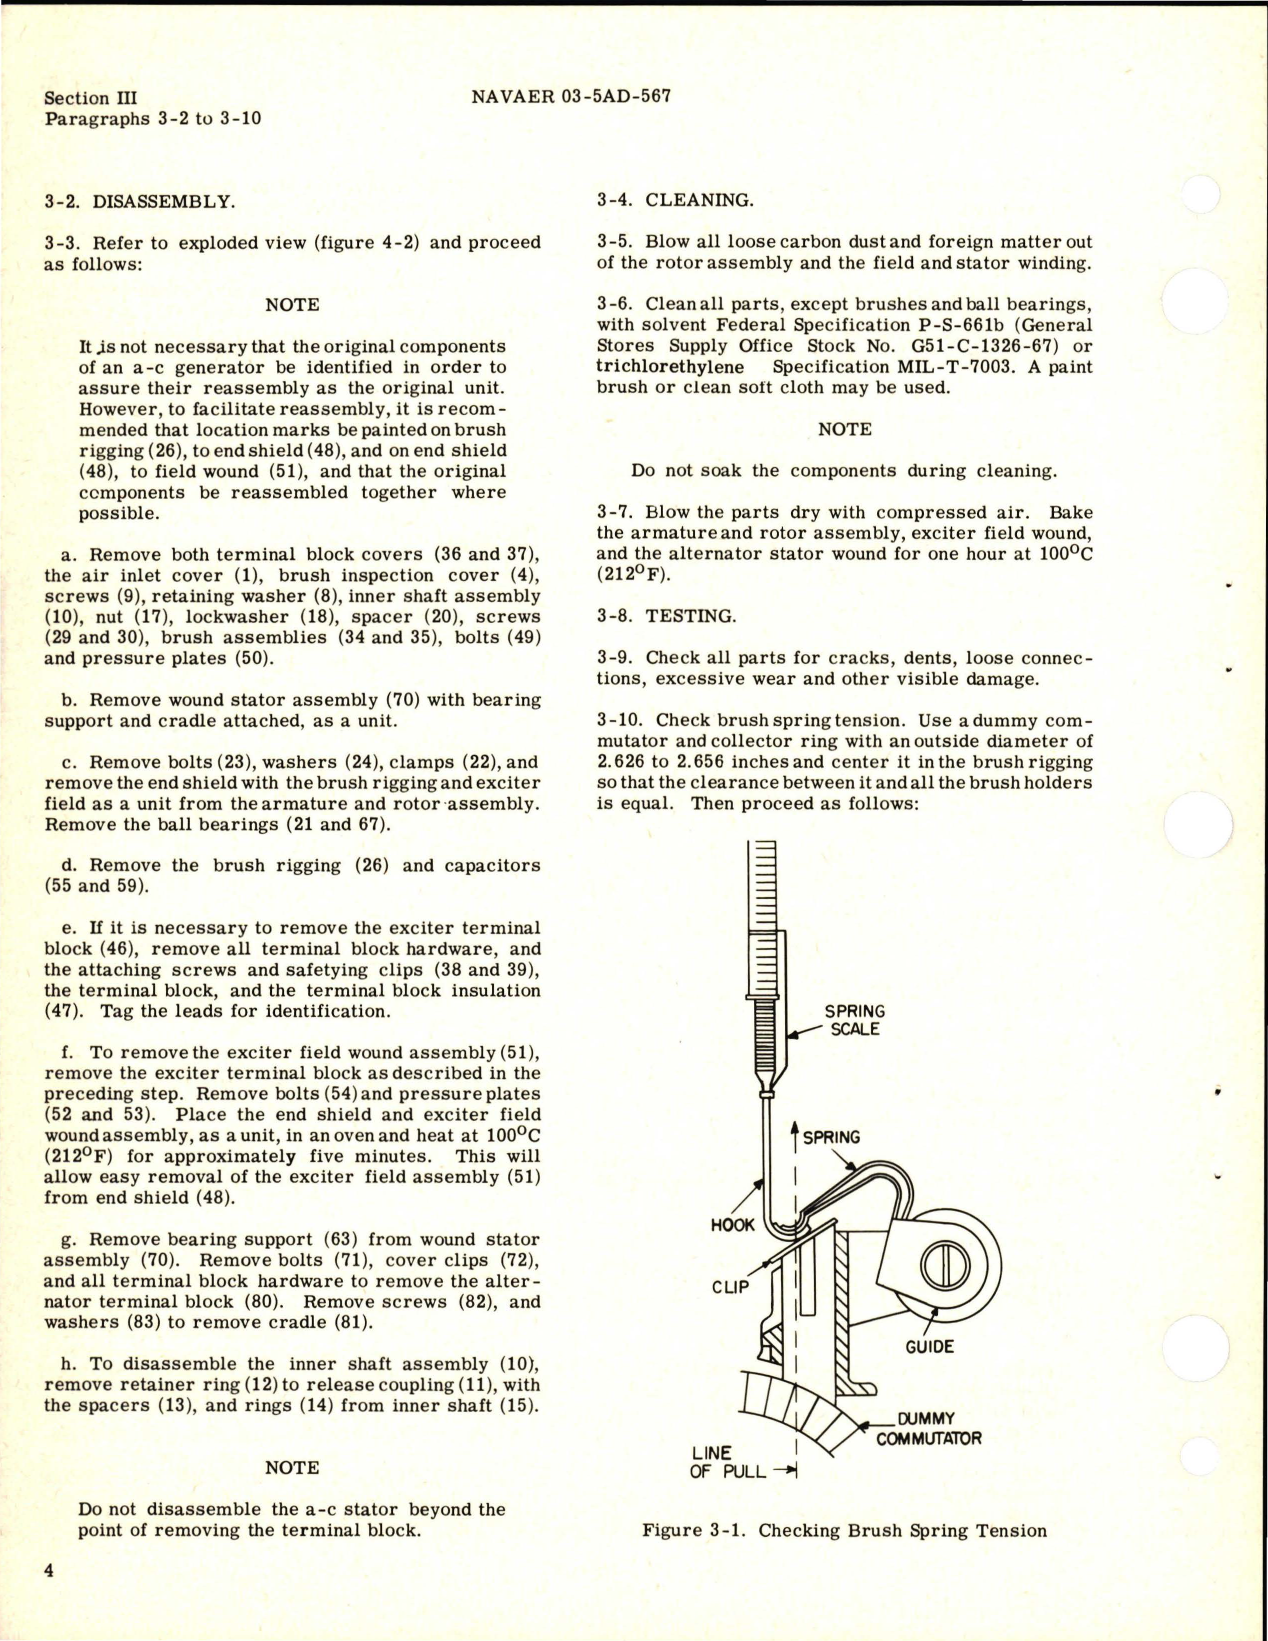 Sample page 8 from AirCorps Library document: Overhaul and Service Instructions for AC Generators 